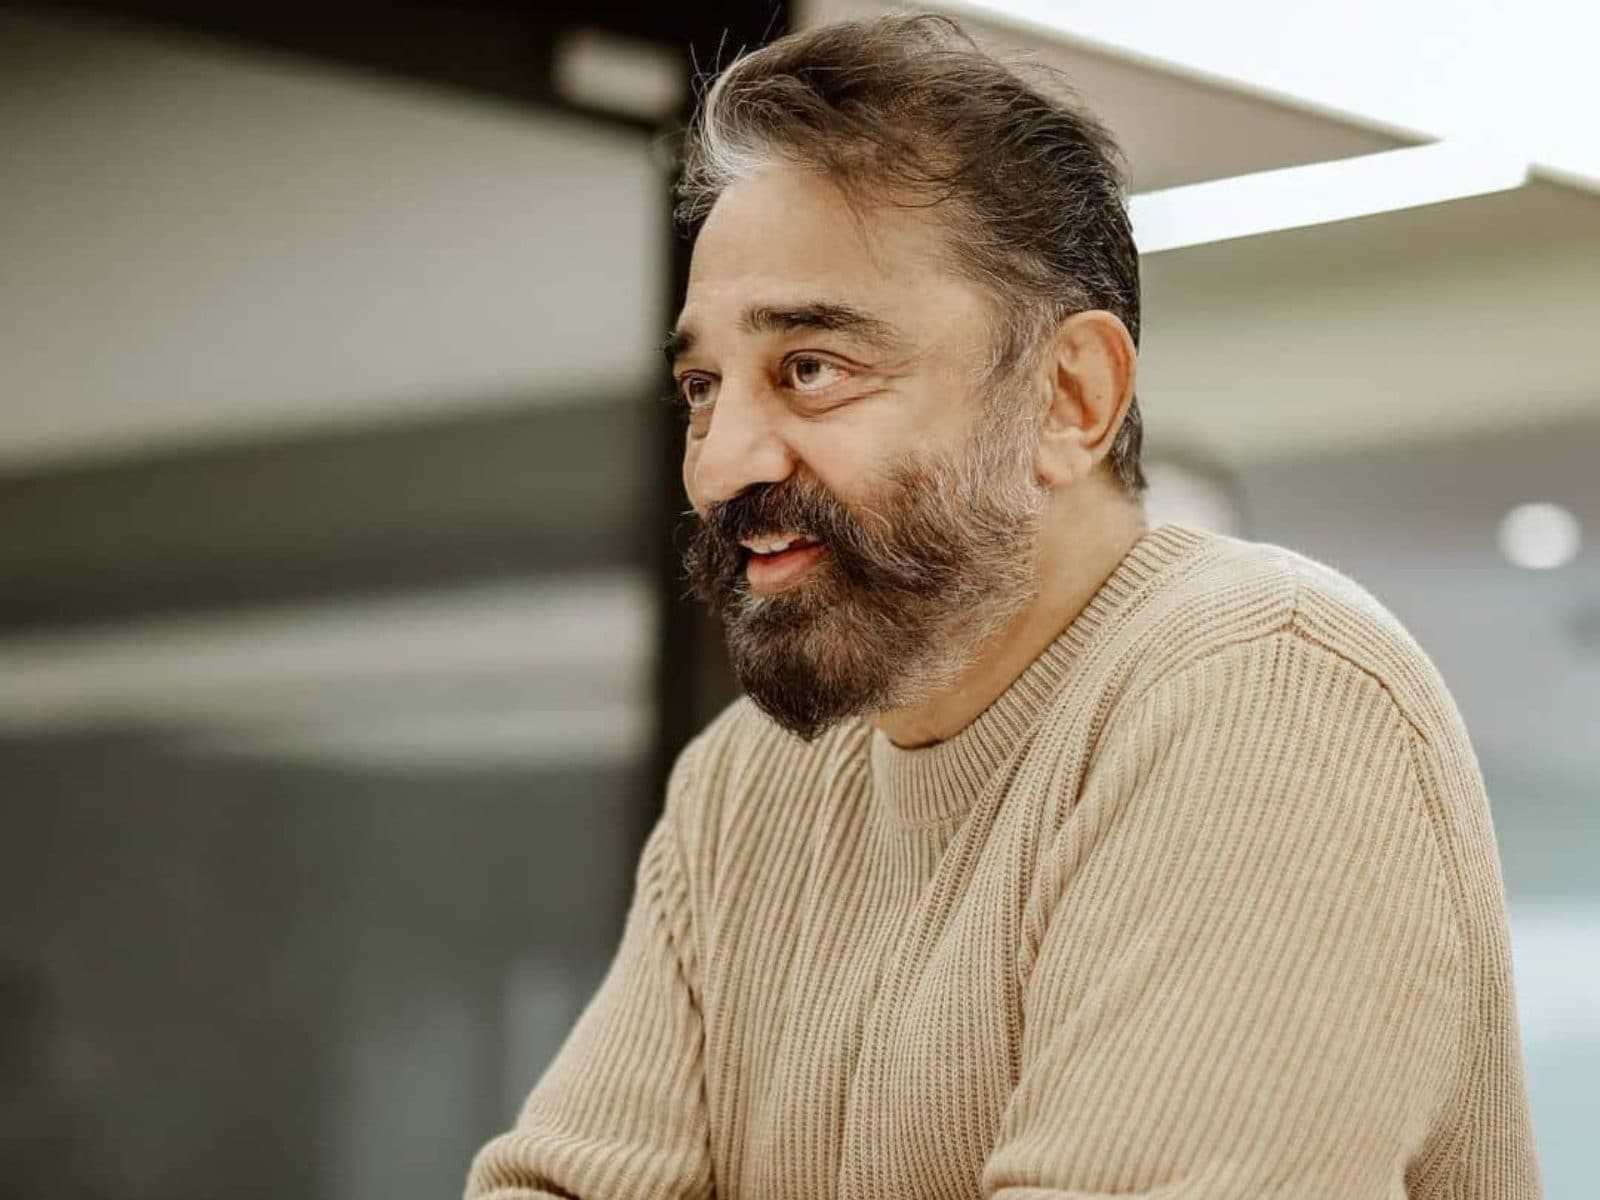 Project K: Kamal Haasan will be joining the cast of the Prabhas starrer in August